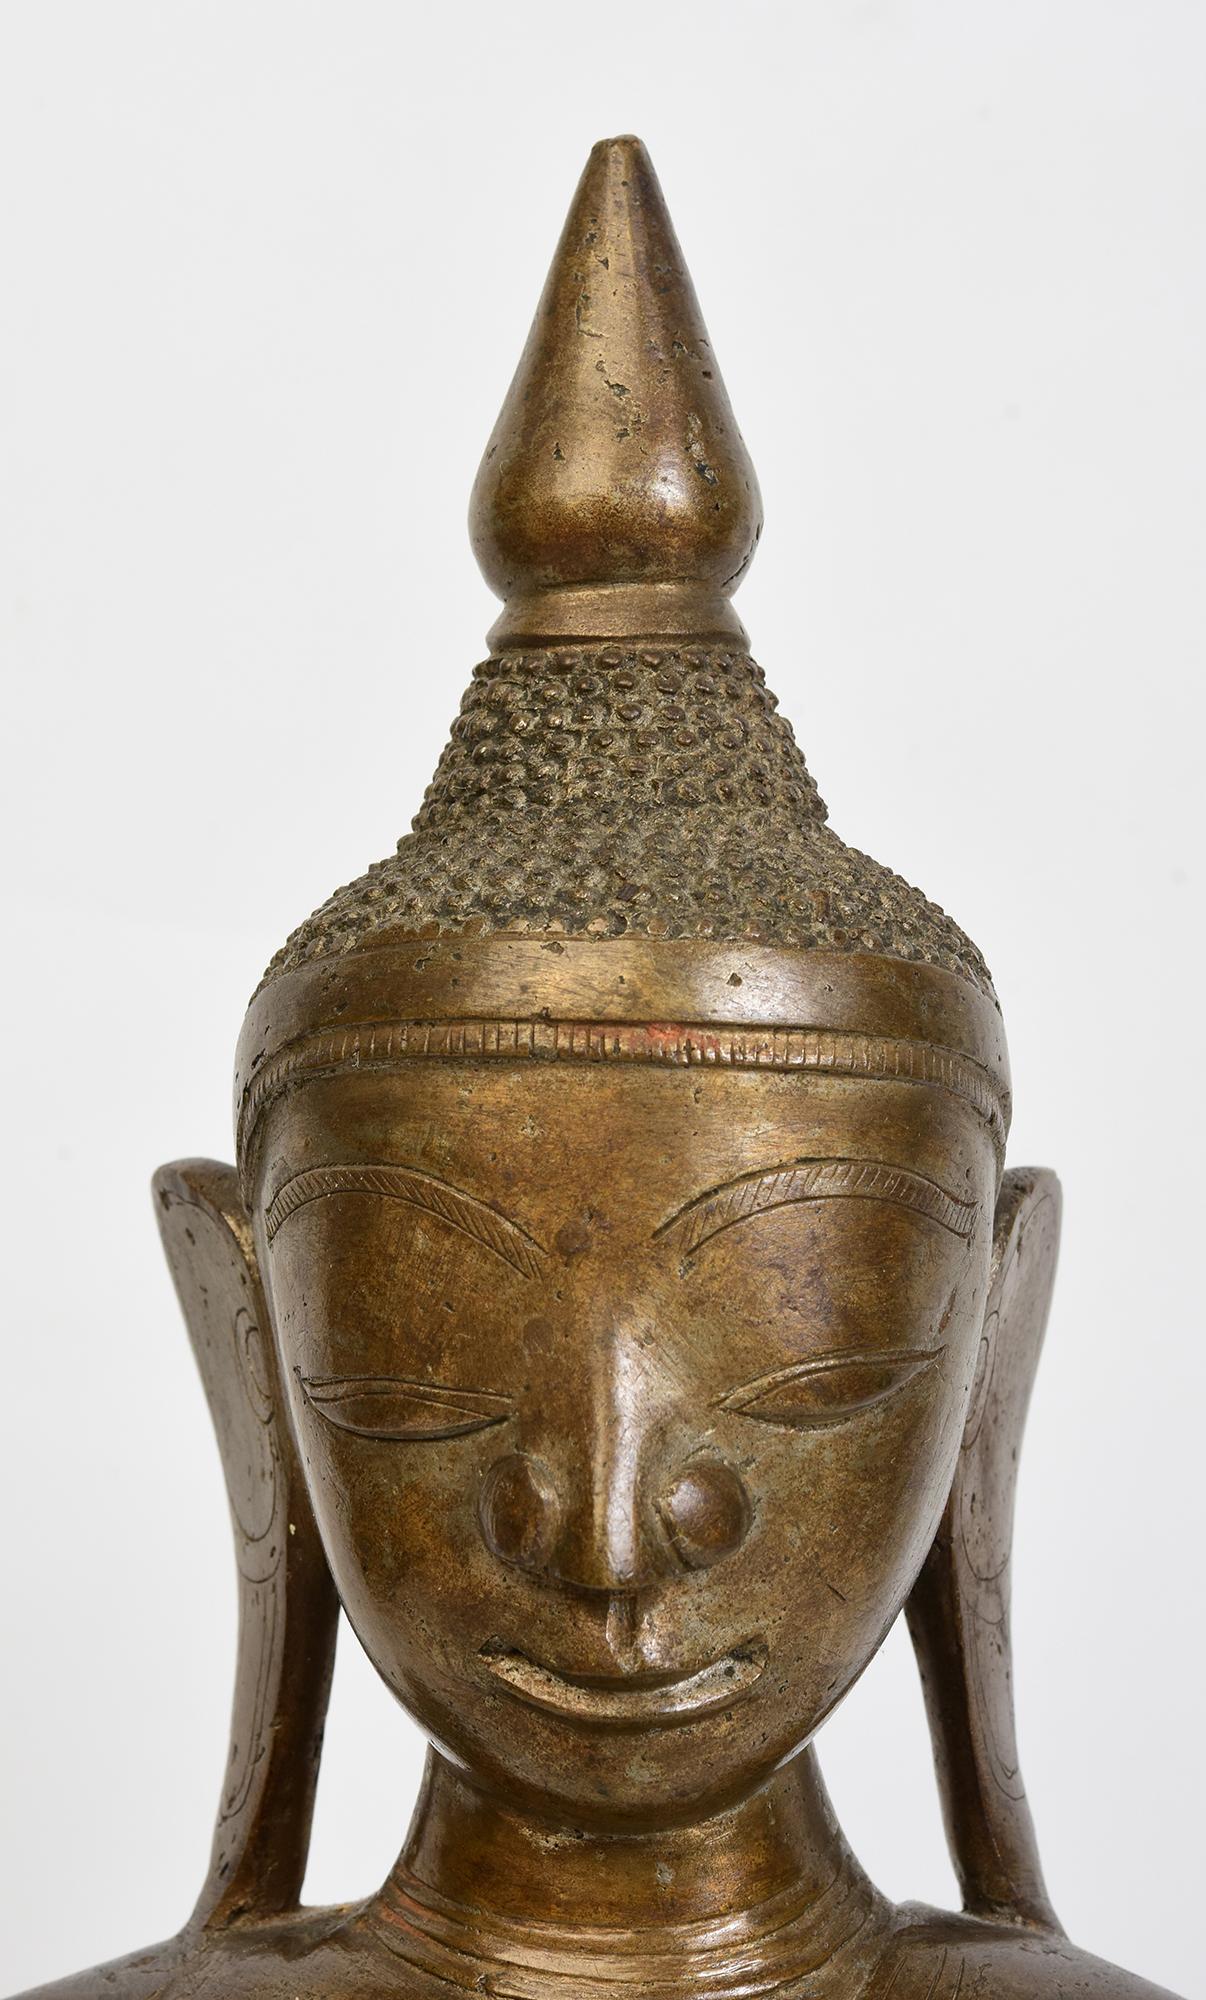 Antique Burmese bronze Buddha sitting in Mara Vijaya (calling the earth to witness) posture on a base.

Age: Burma, Shan Period, 18th Century
Size: Height 38.5 C.M. / Width 21.5 C.M. / Depth 9.5 C.M.
Condition: Nice condition overall (some expected